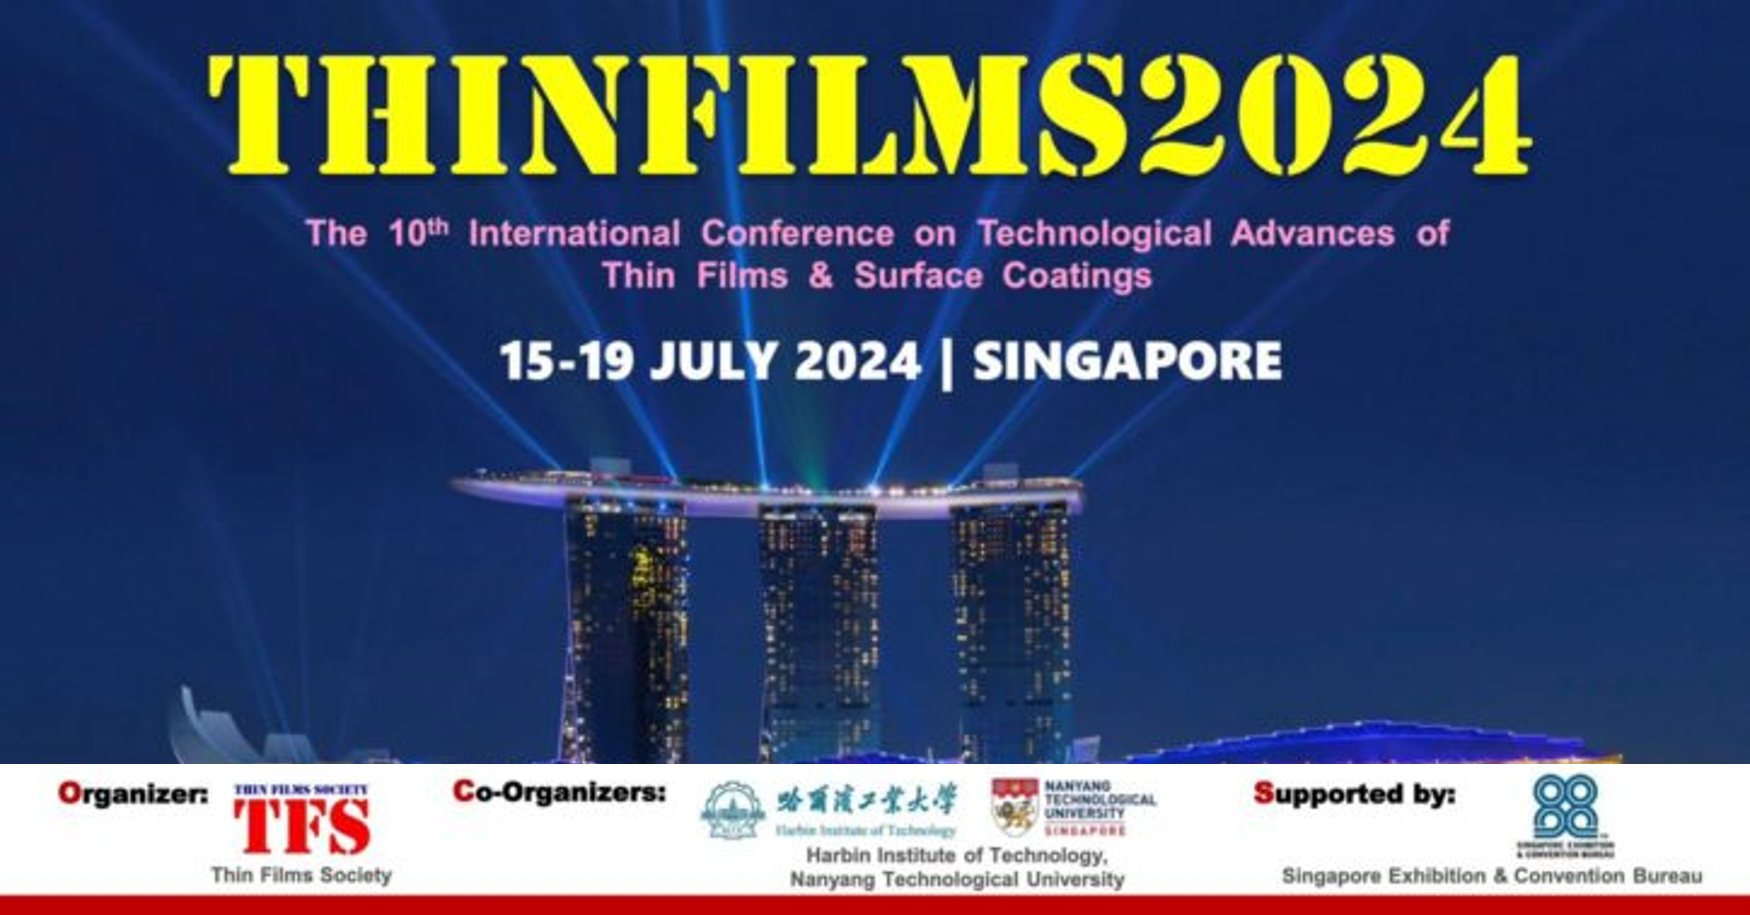 Thinfilms2024